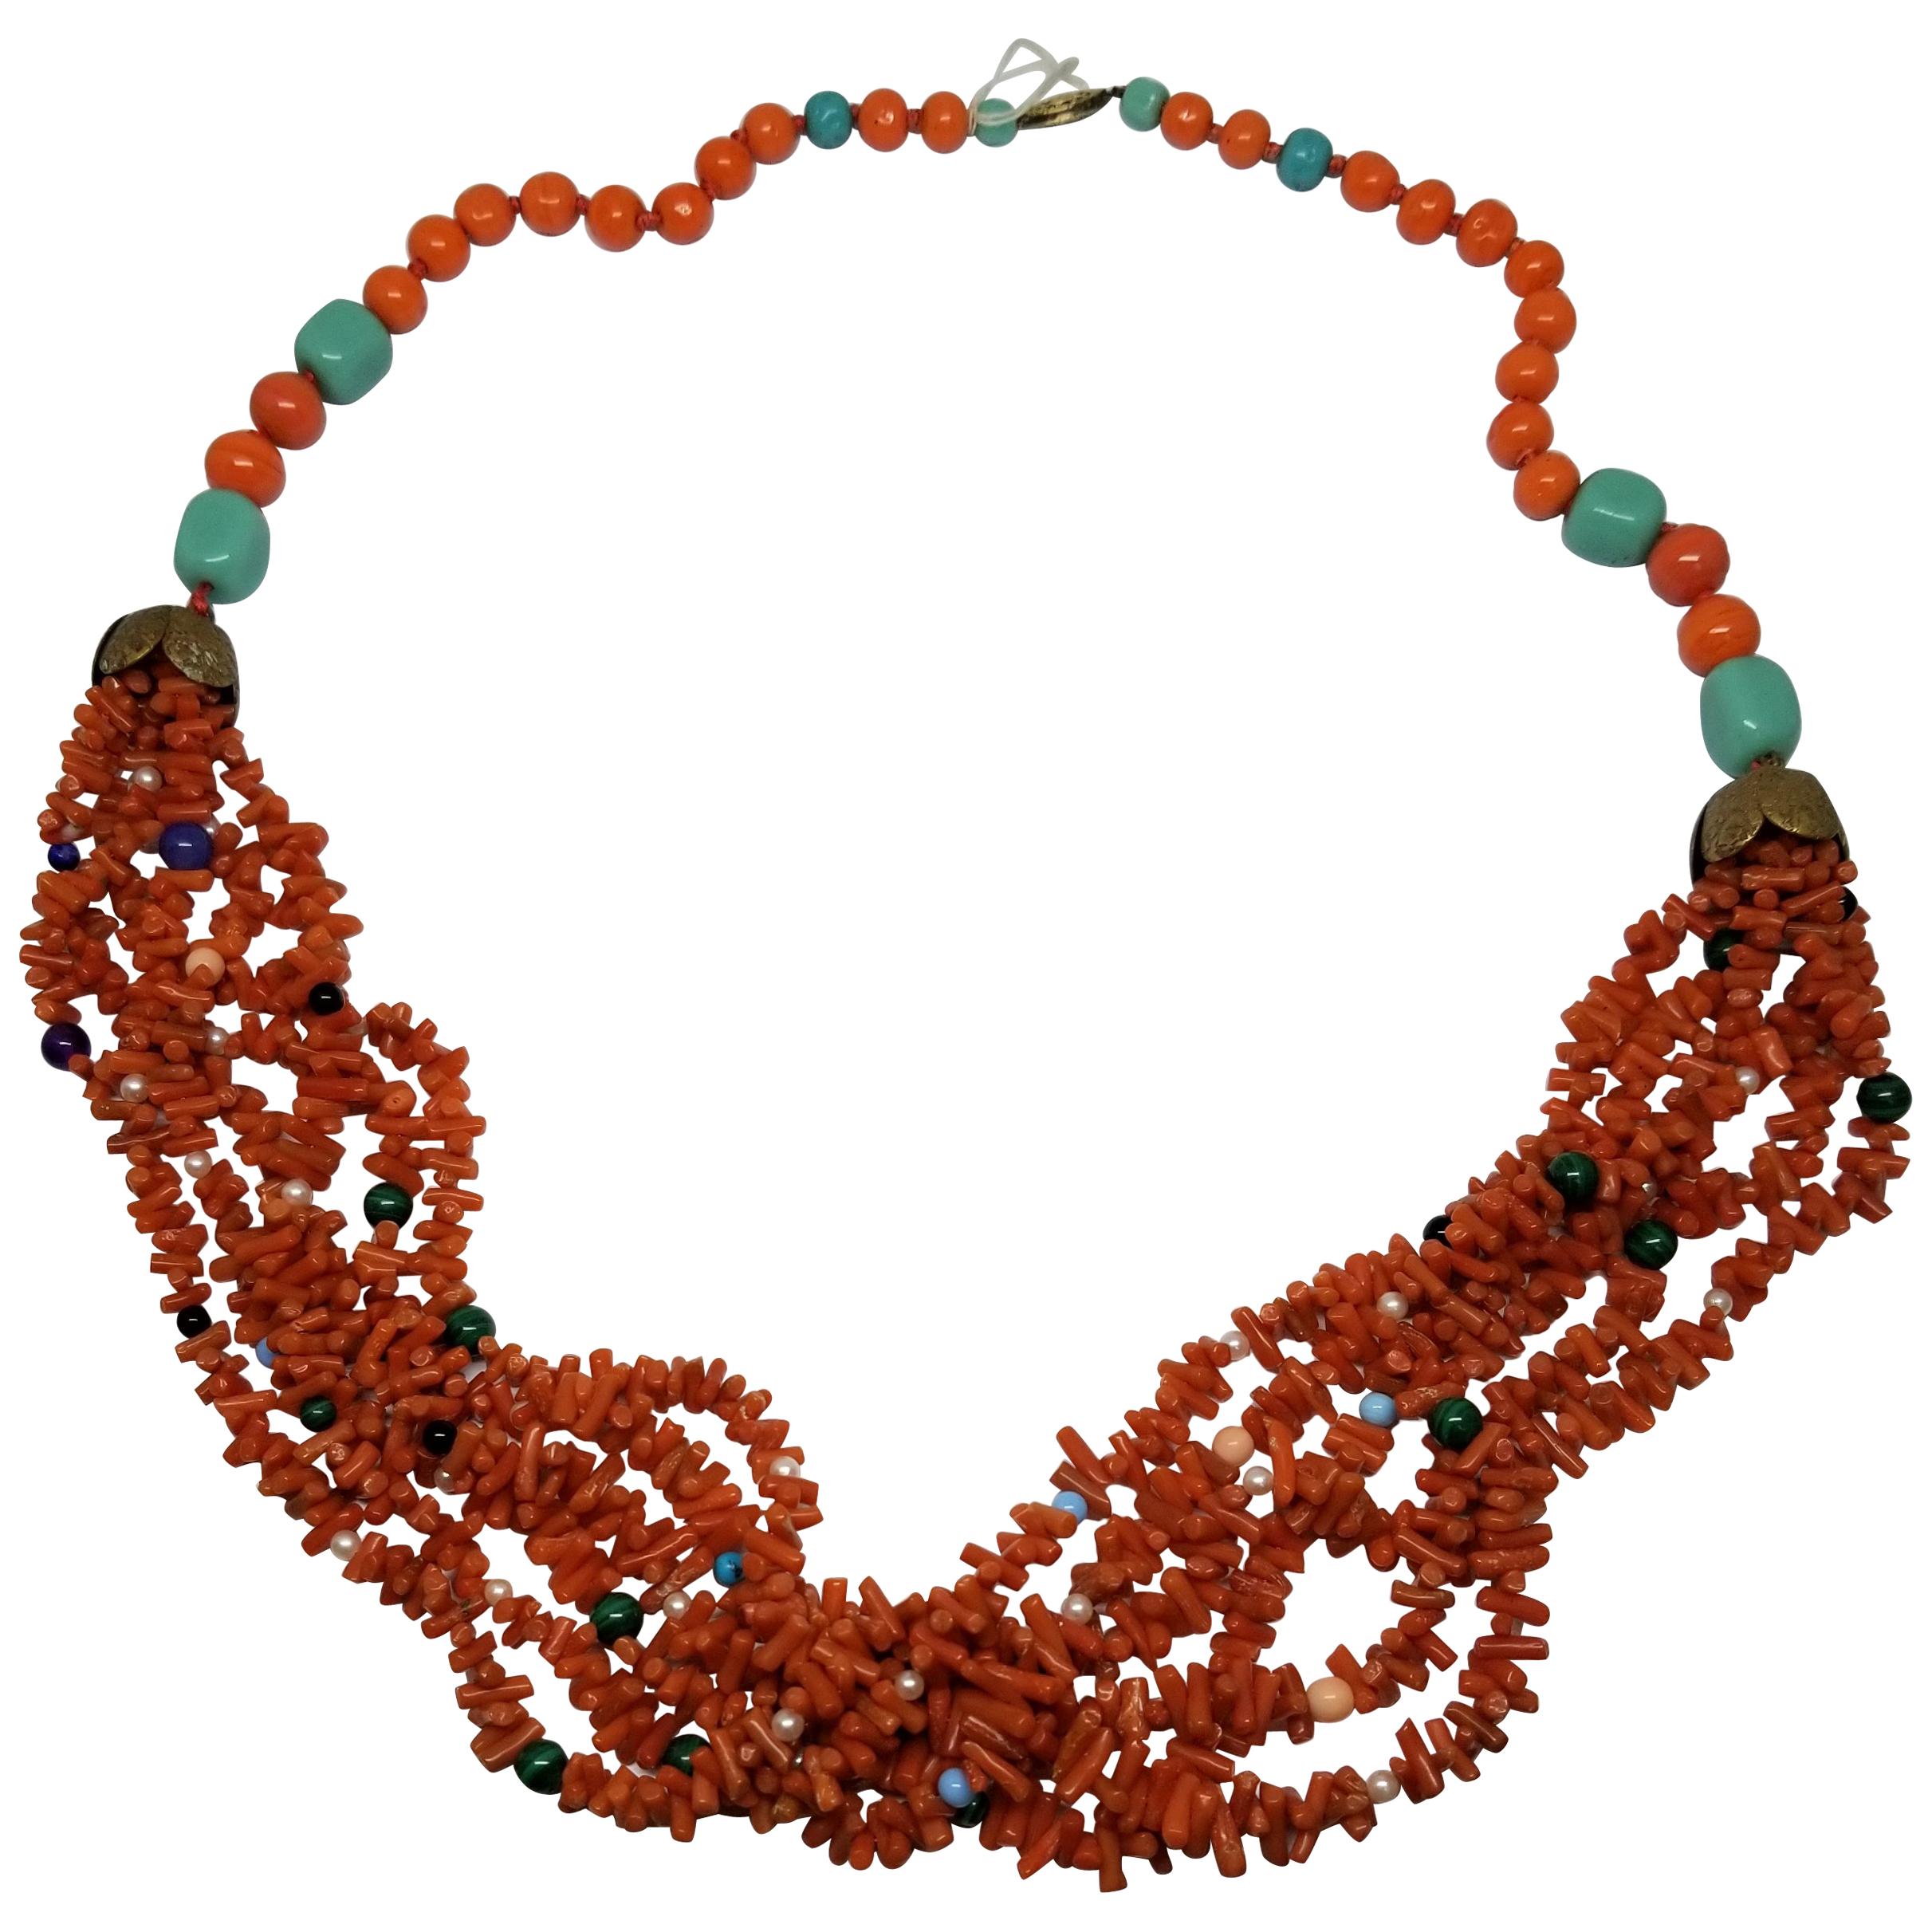 Natural Coral Beads and Sticks with Turquoise and Semi-Precious Stones